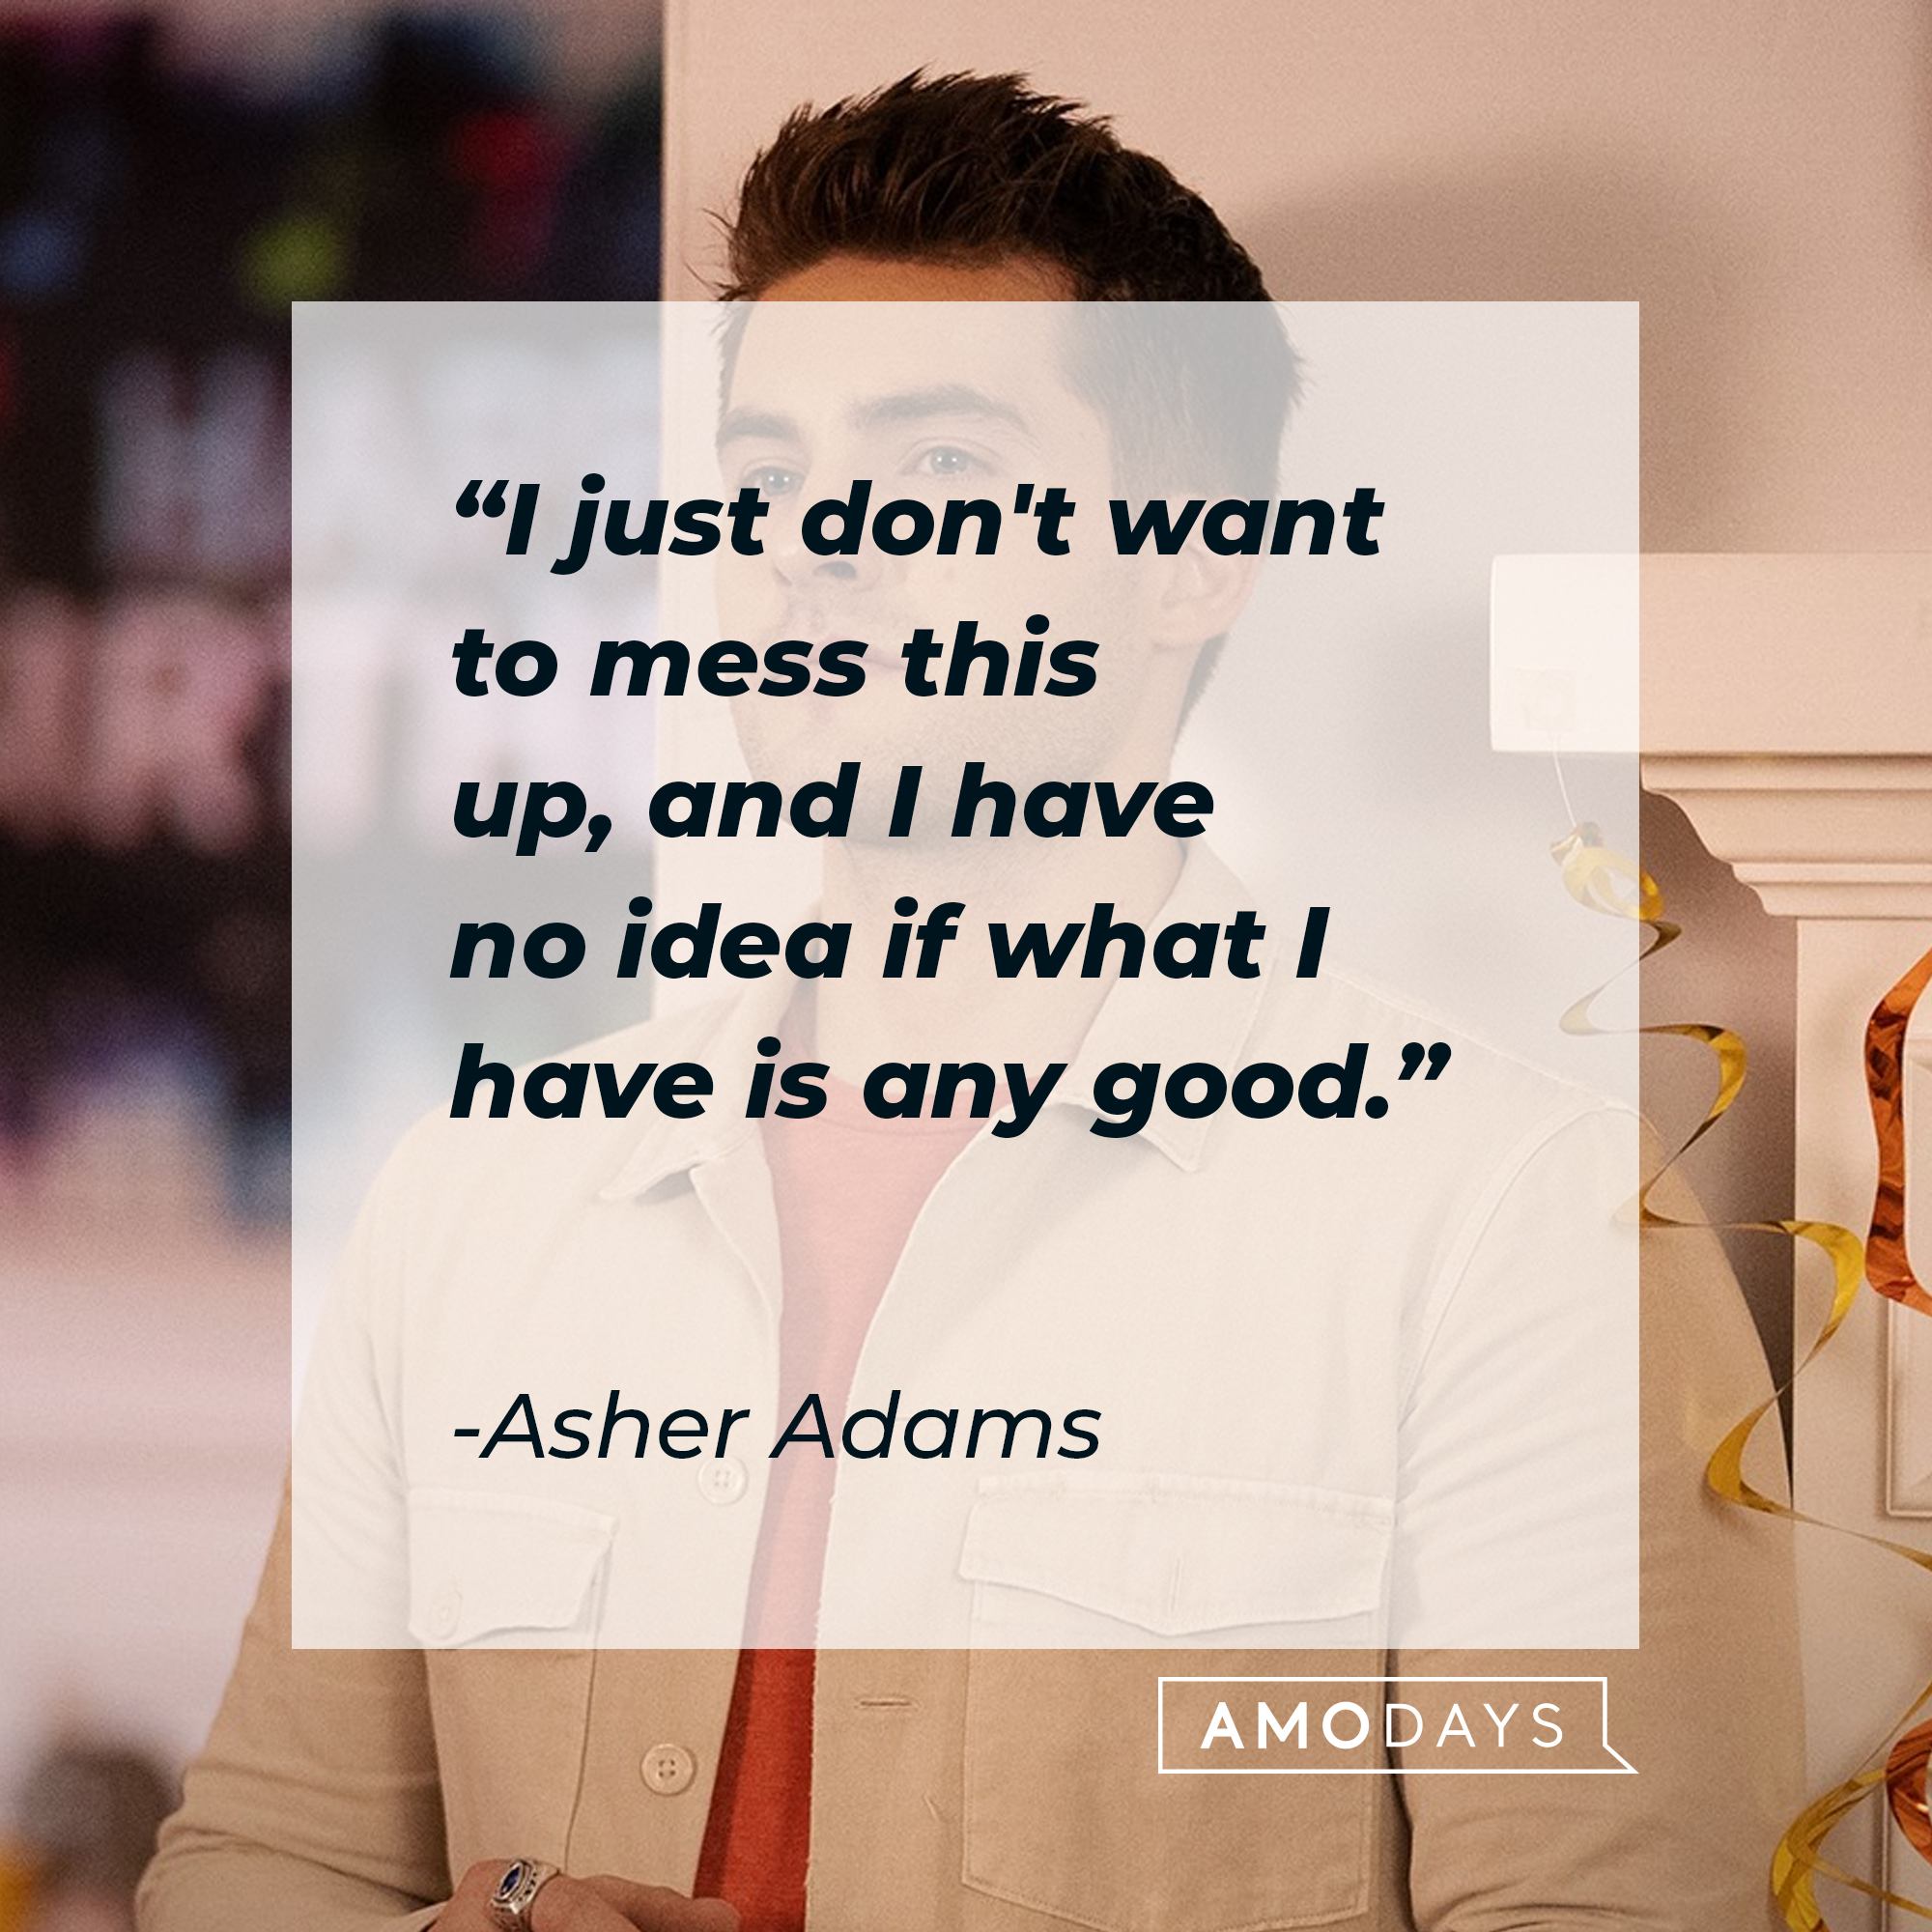 Asher Adams' quote: "I just don't want to mess this up, and I have no idea if what I have is any good." | Source: facebook.com/CWAllAmerican